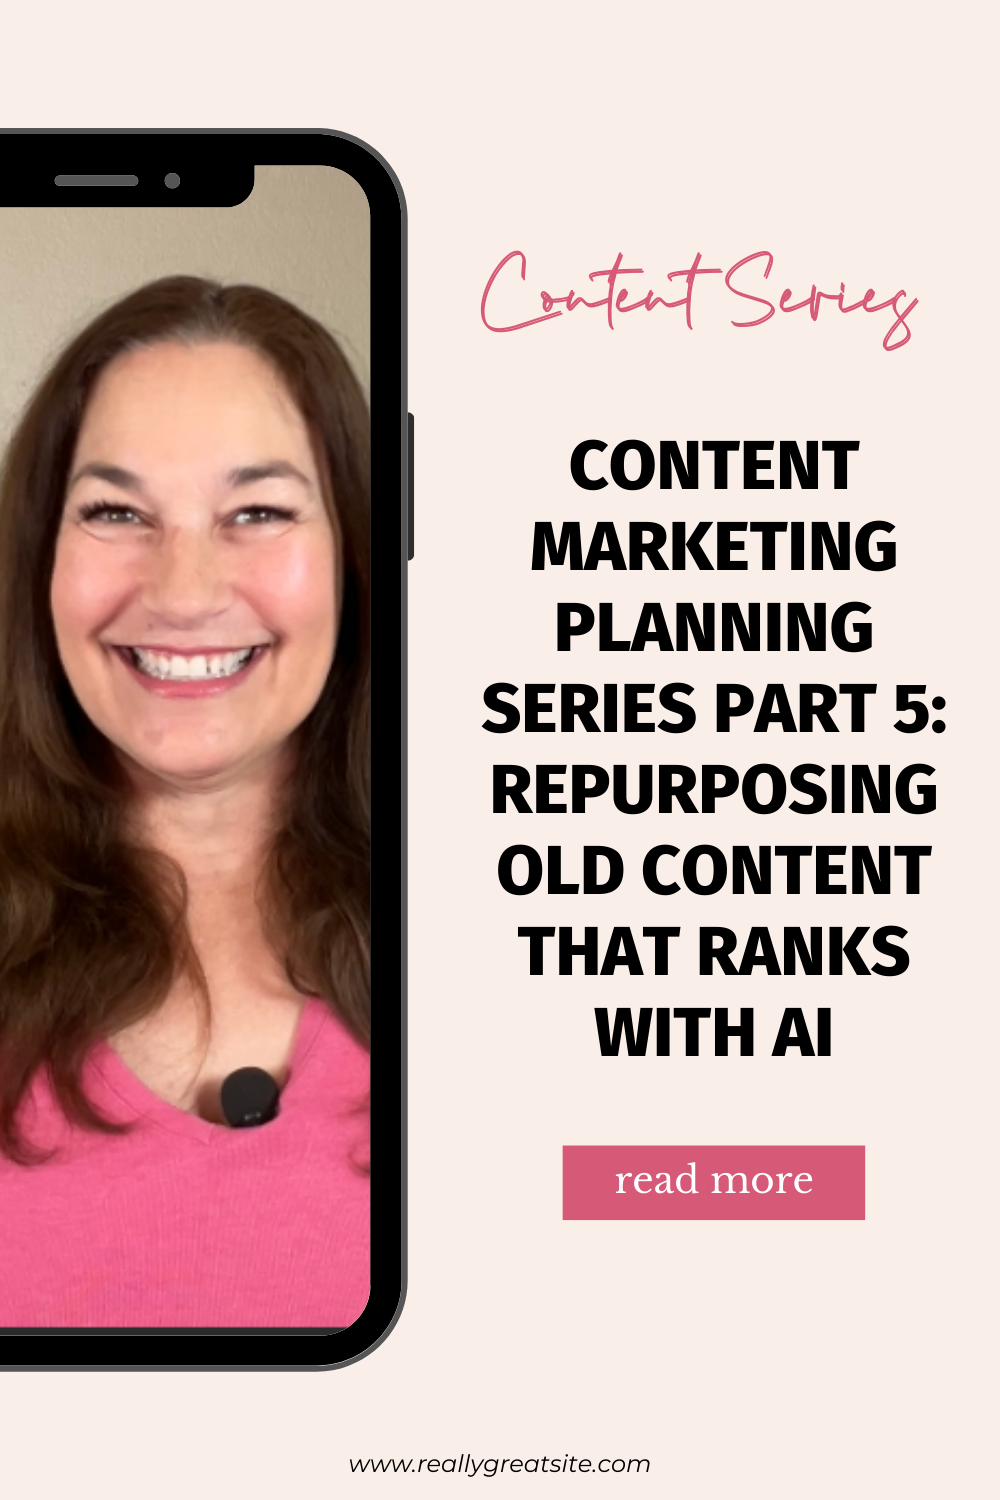 Content Marketing Planning Series Part 5 Repurposing Old Content That Ranks with Ai with Jen Vazquez Media